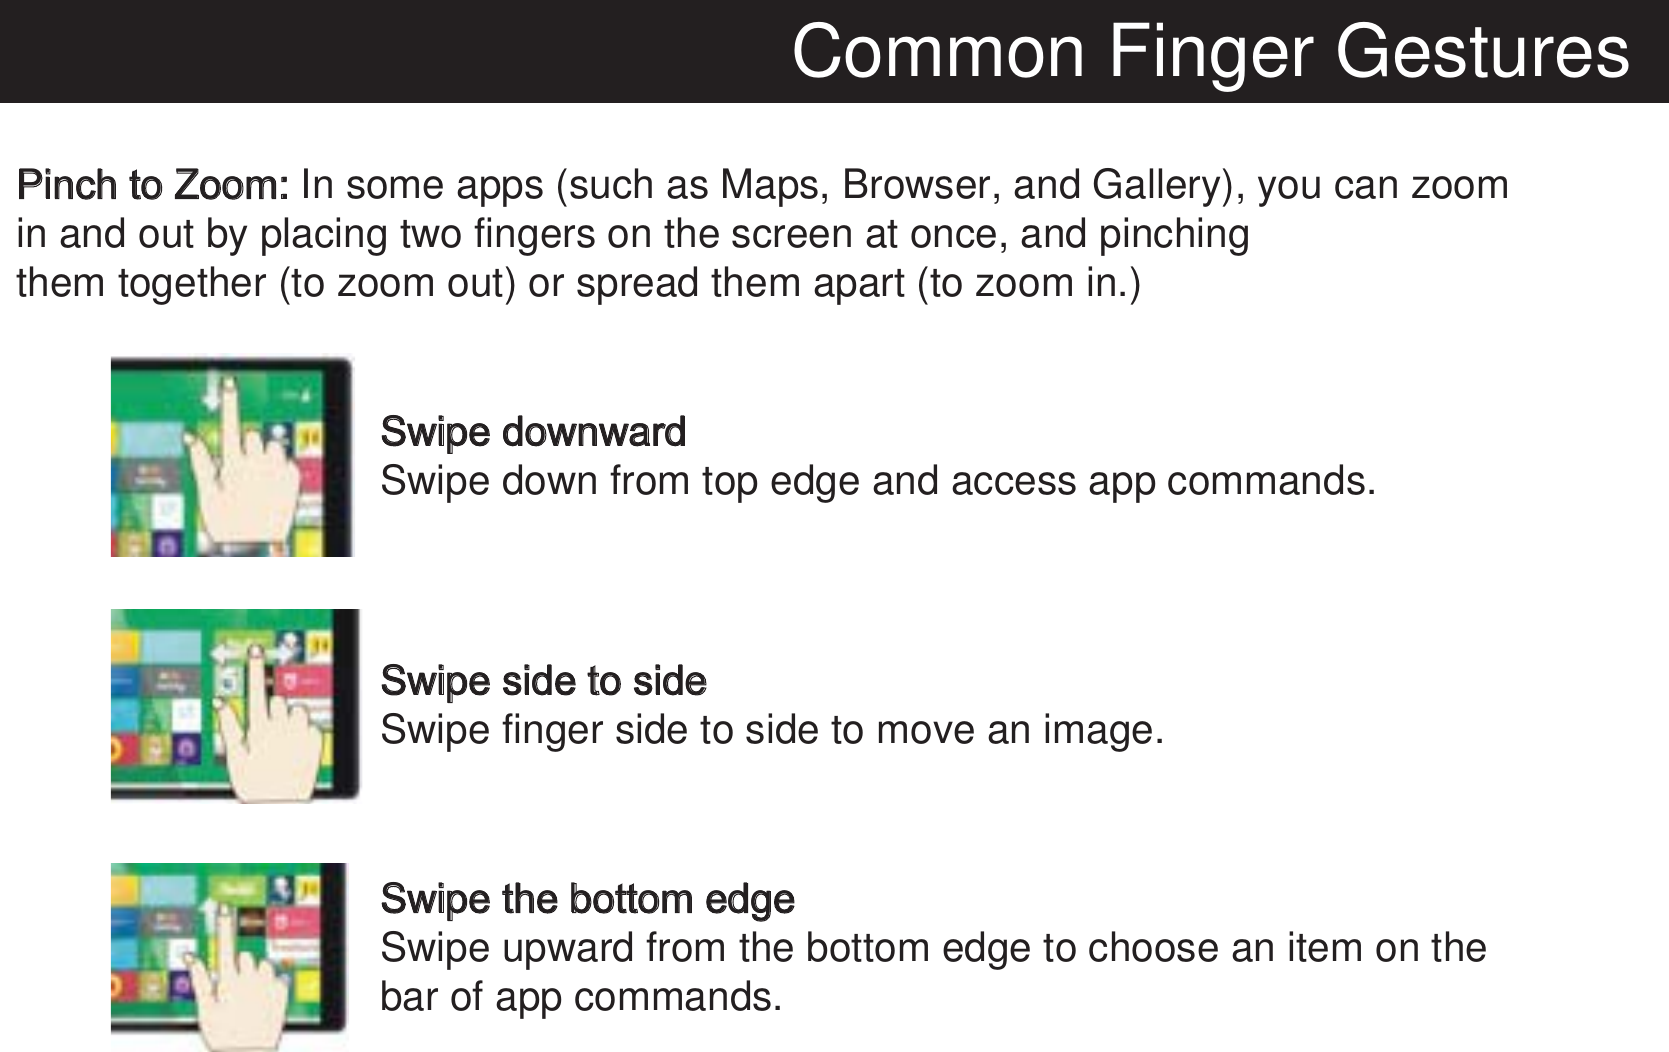 Common Finger GesturesPinch to Zoom: In some apps (such as Maps, Browser, and Gallery), you can zoom in and out by placing two fingers on the screen at once, and pinching them together (to zoom out) or spread them apart (to zoom in.) Swipe downwardSwipe down from top edge and access app commands.Swipe side to sideSwipe finger side to side to move an image.Swipe the bottom edgeSwipe upward from the bottom edge to choose an item on thebar of app commands.